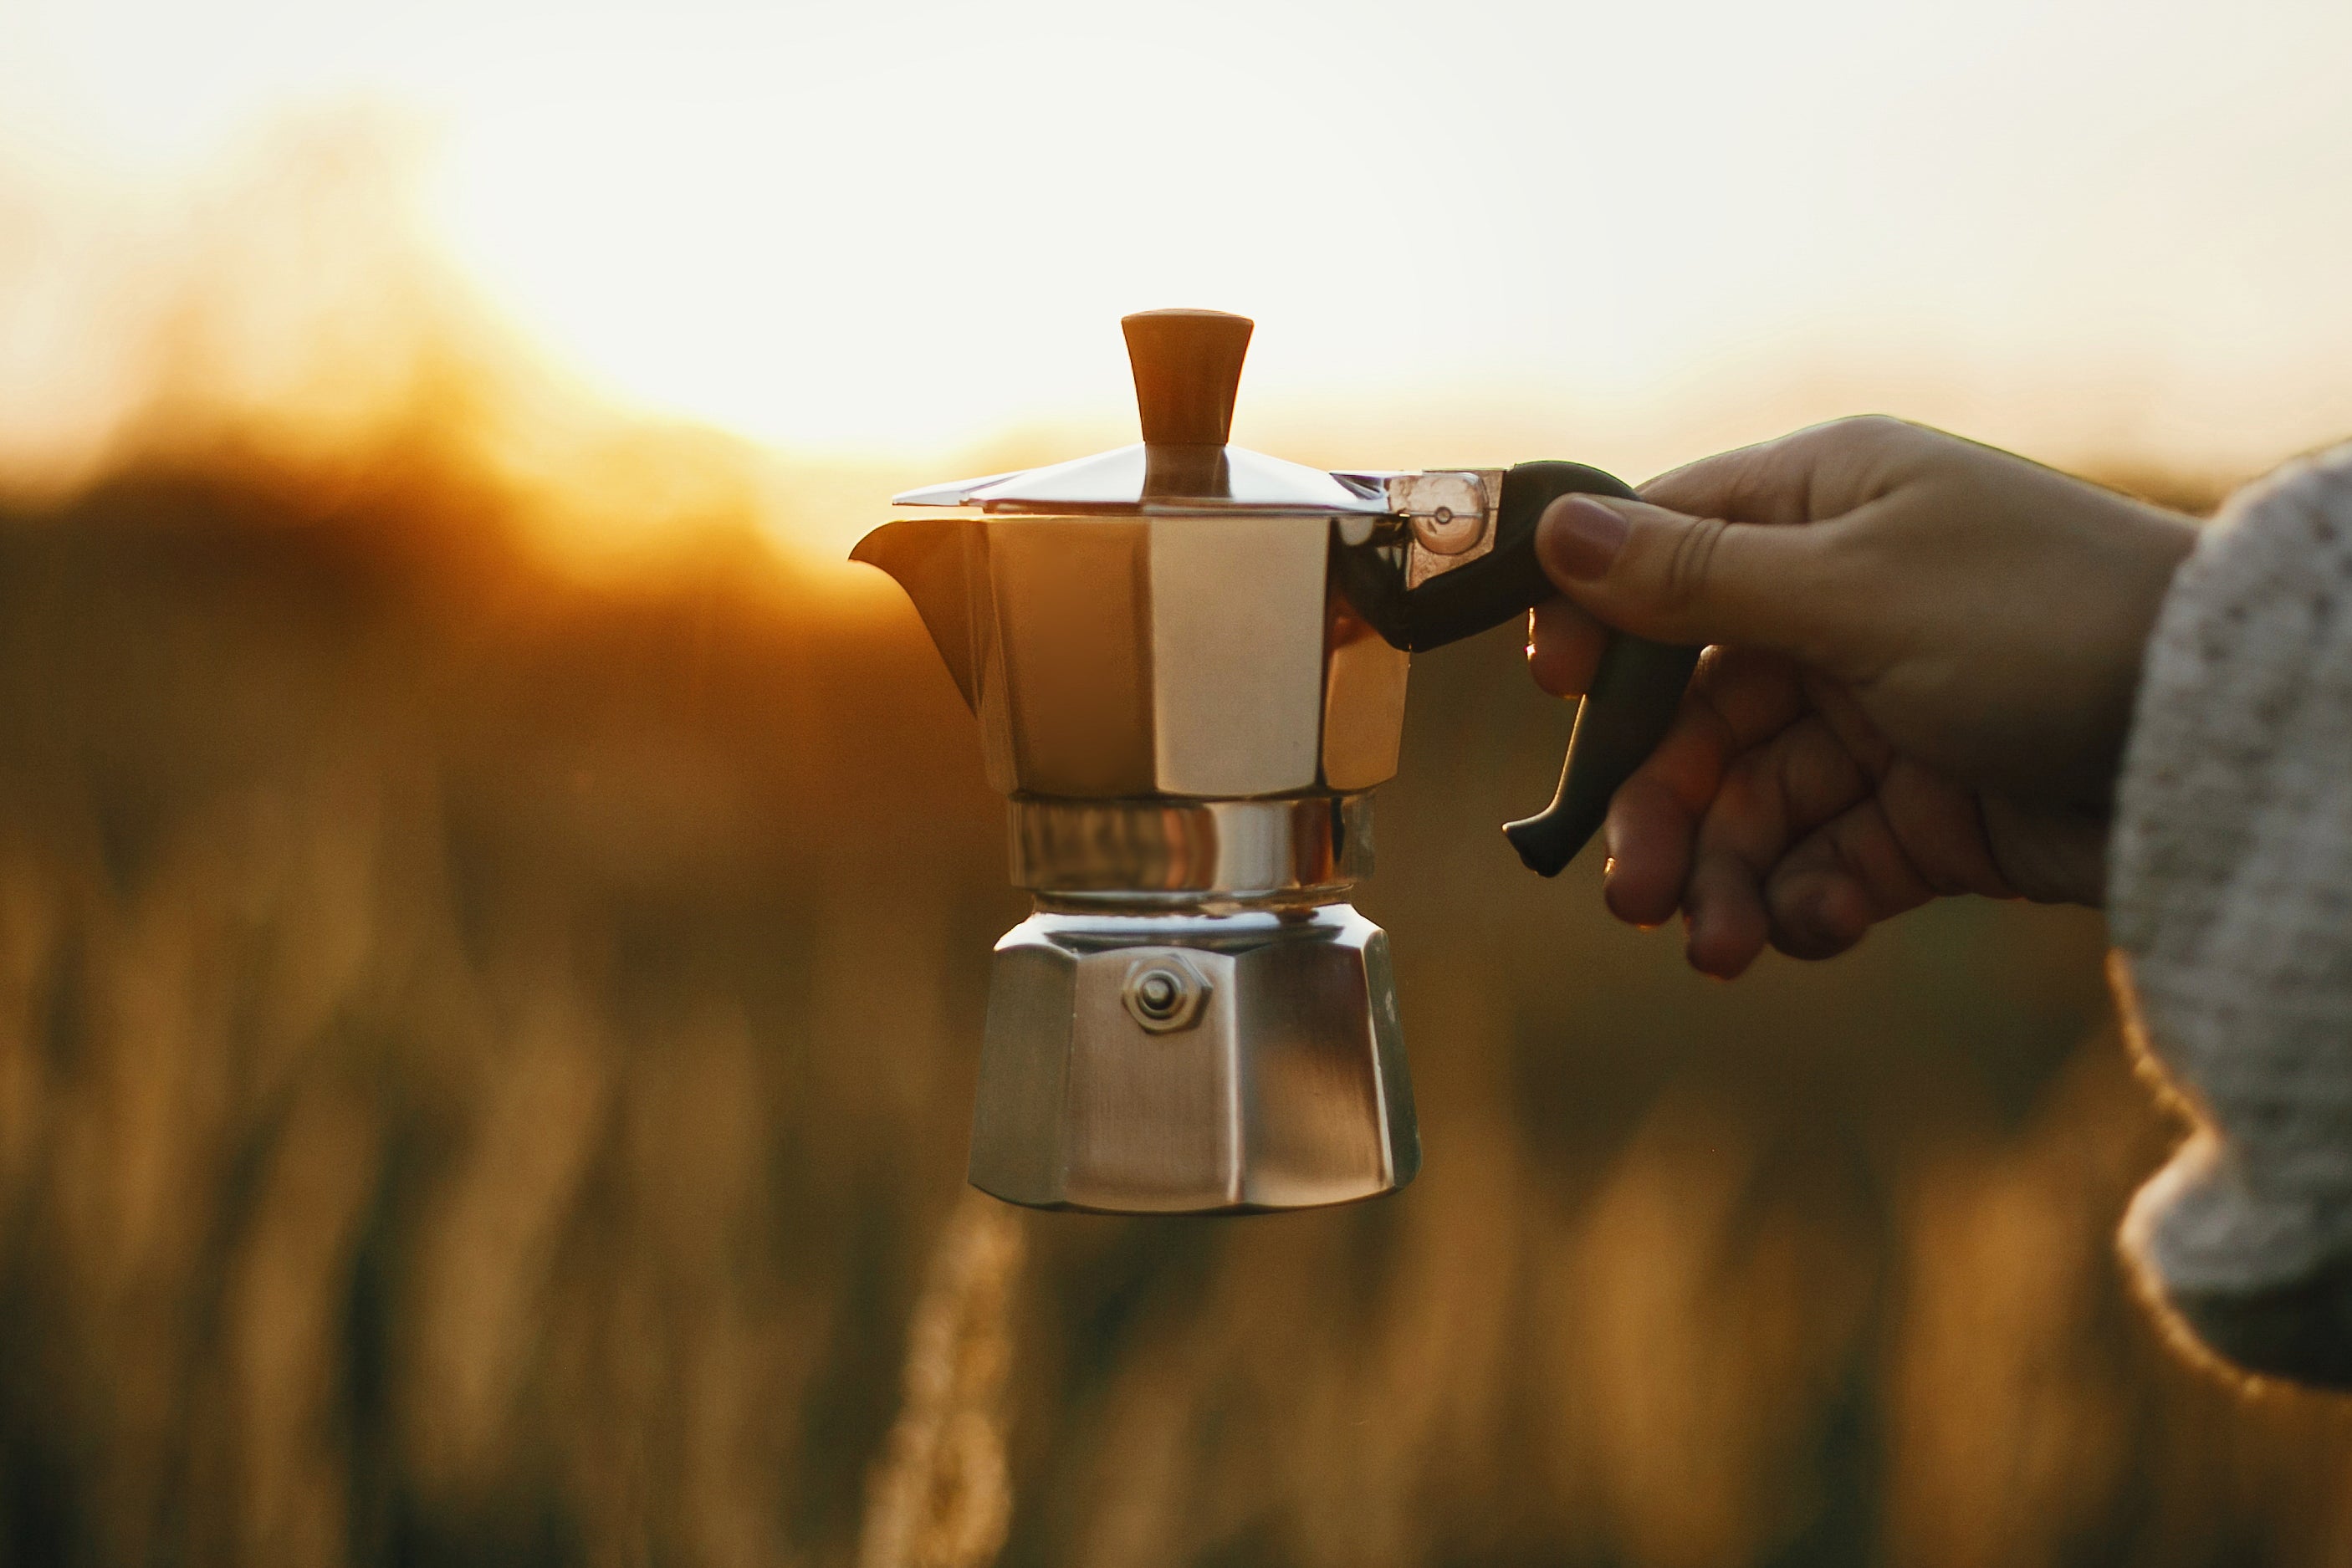 How To Brew In A Moka Pot - Guide To Make Coffee